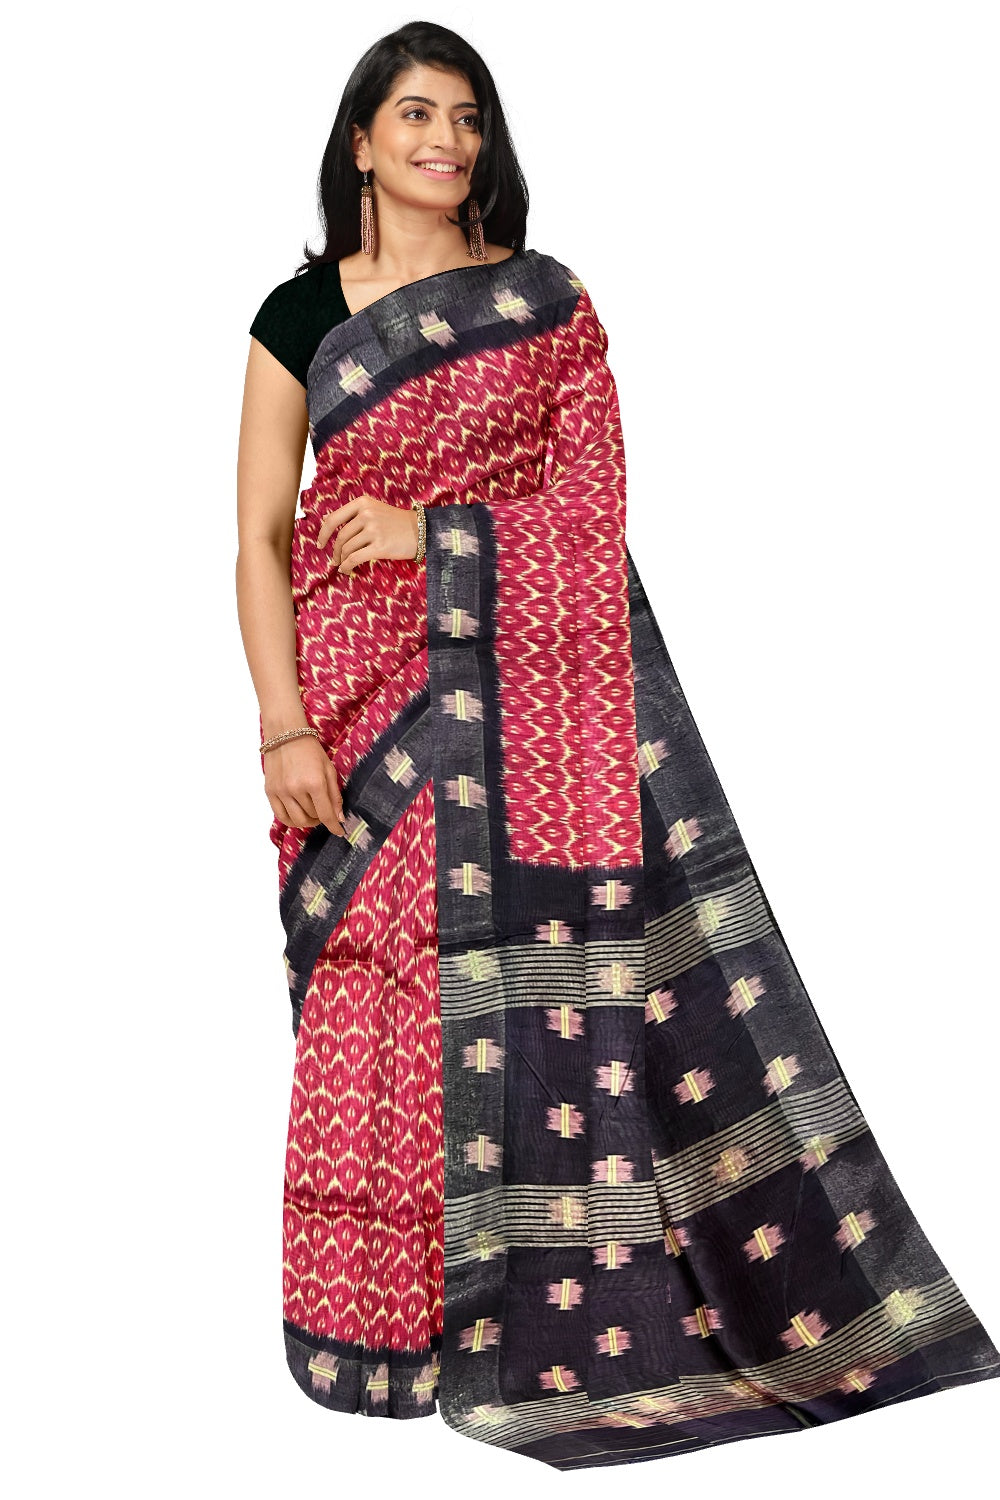 Southloom Tussar Silk Pochampally Themed Rose and White Printed Saree